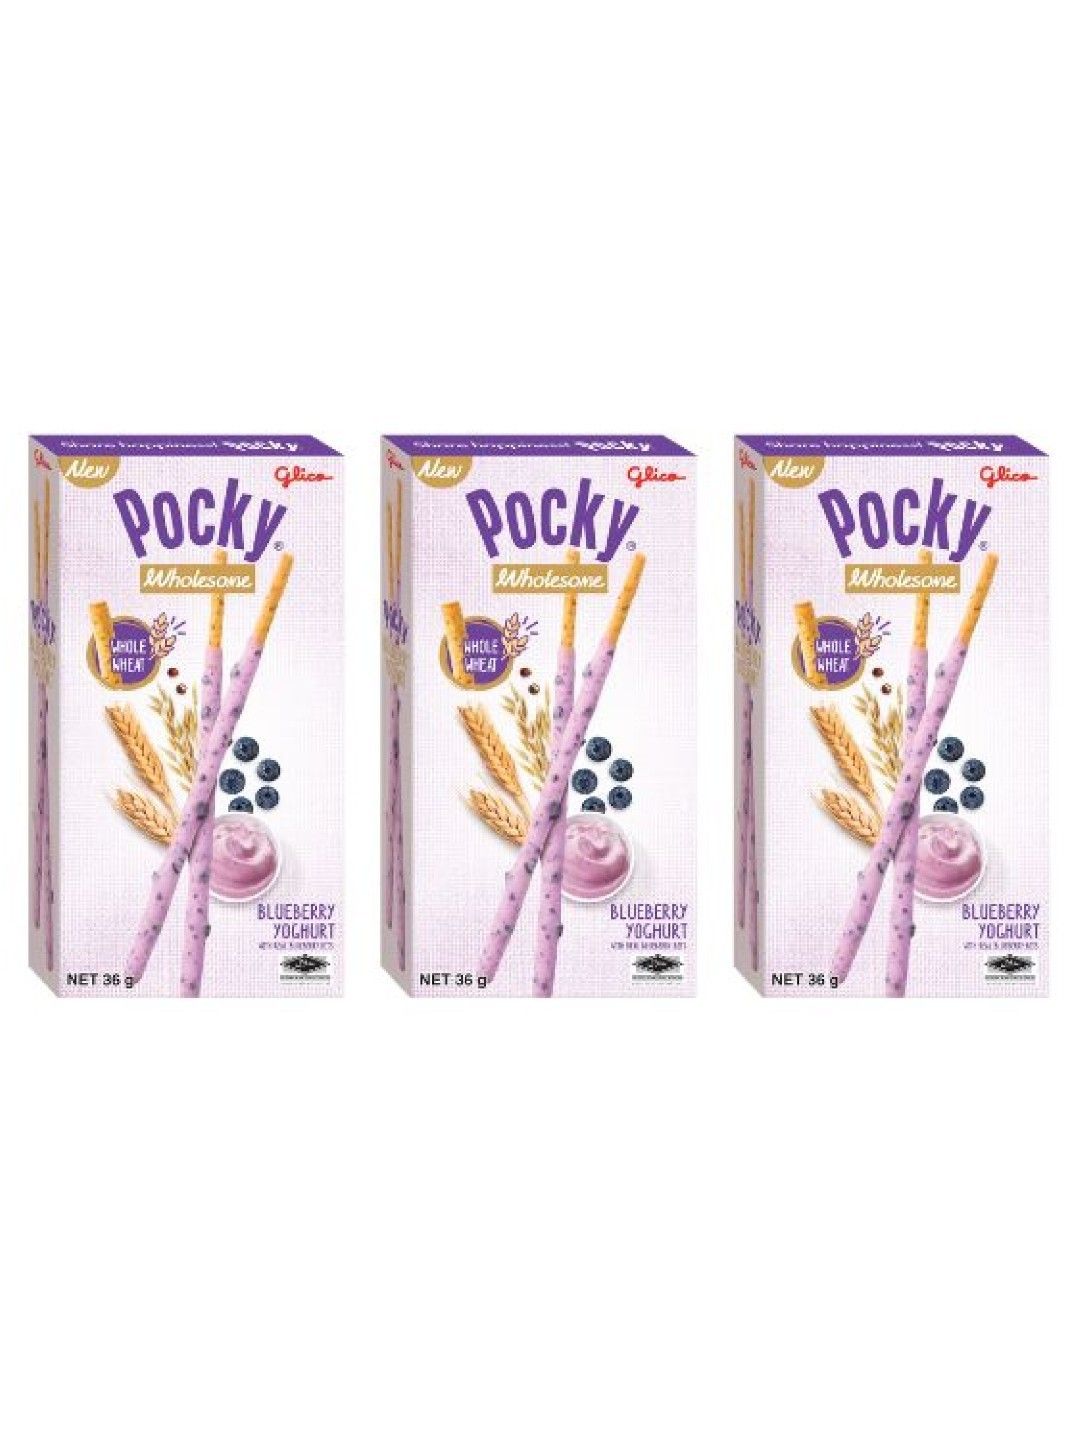 Pocky Wholesome Blueberry Yoghurt Biscuit Sticks (Bundle of 3) (No Color- Image 1)